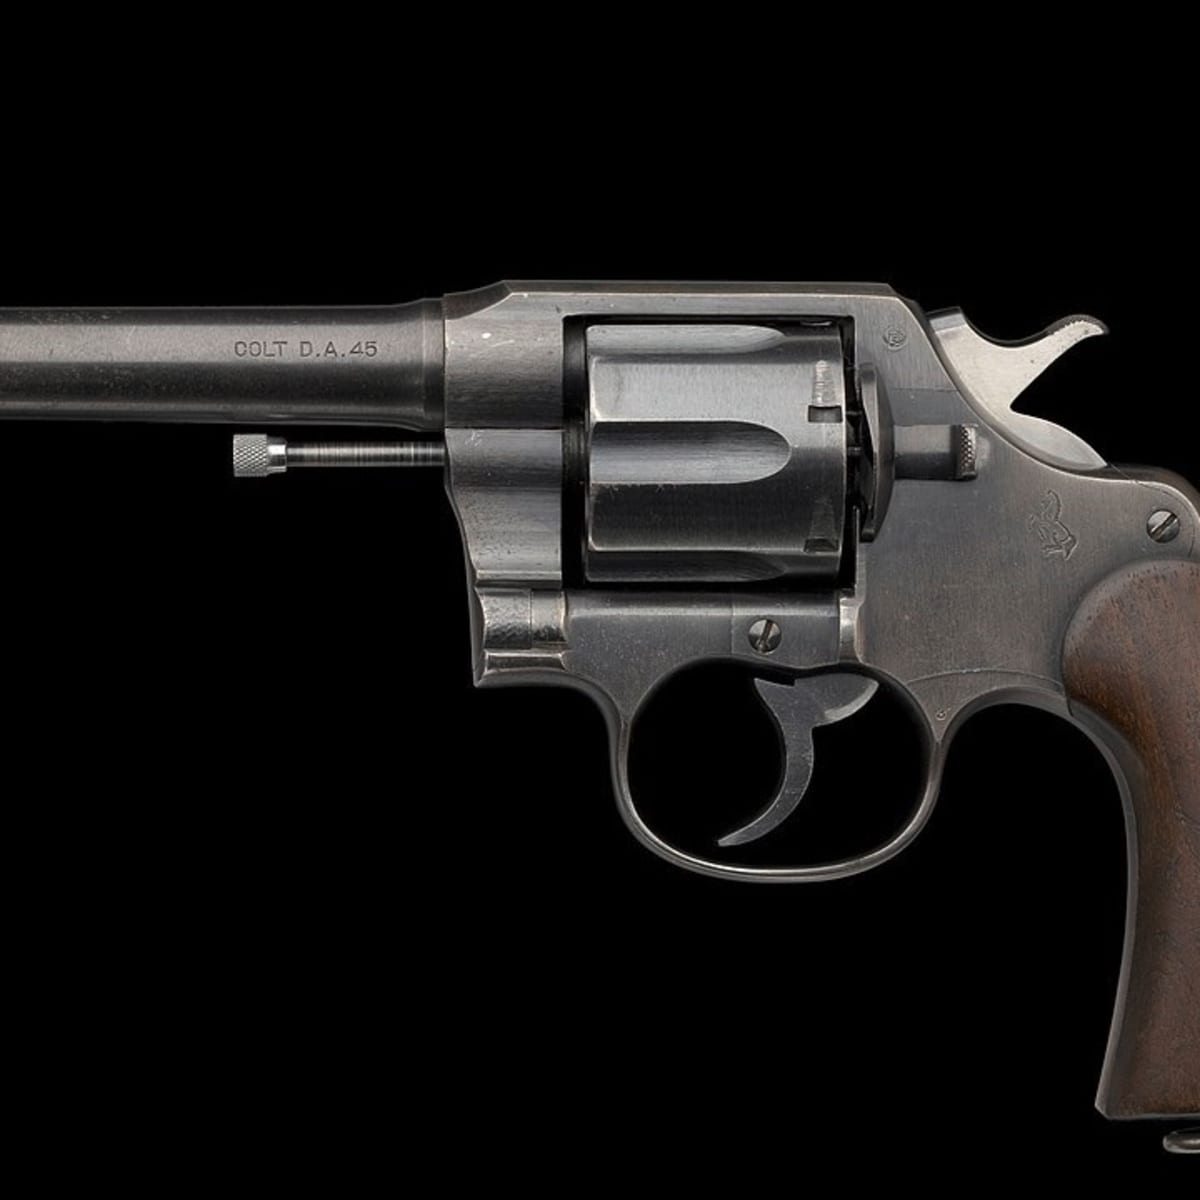 45-Caliber Double-Action U.S. Military Revolvers - Firearms News